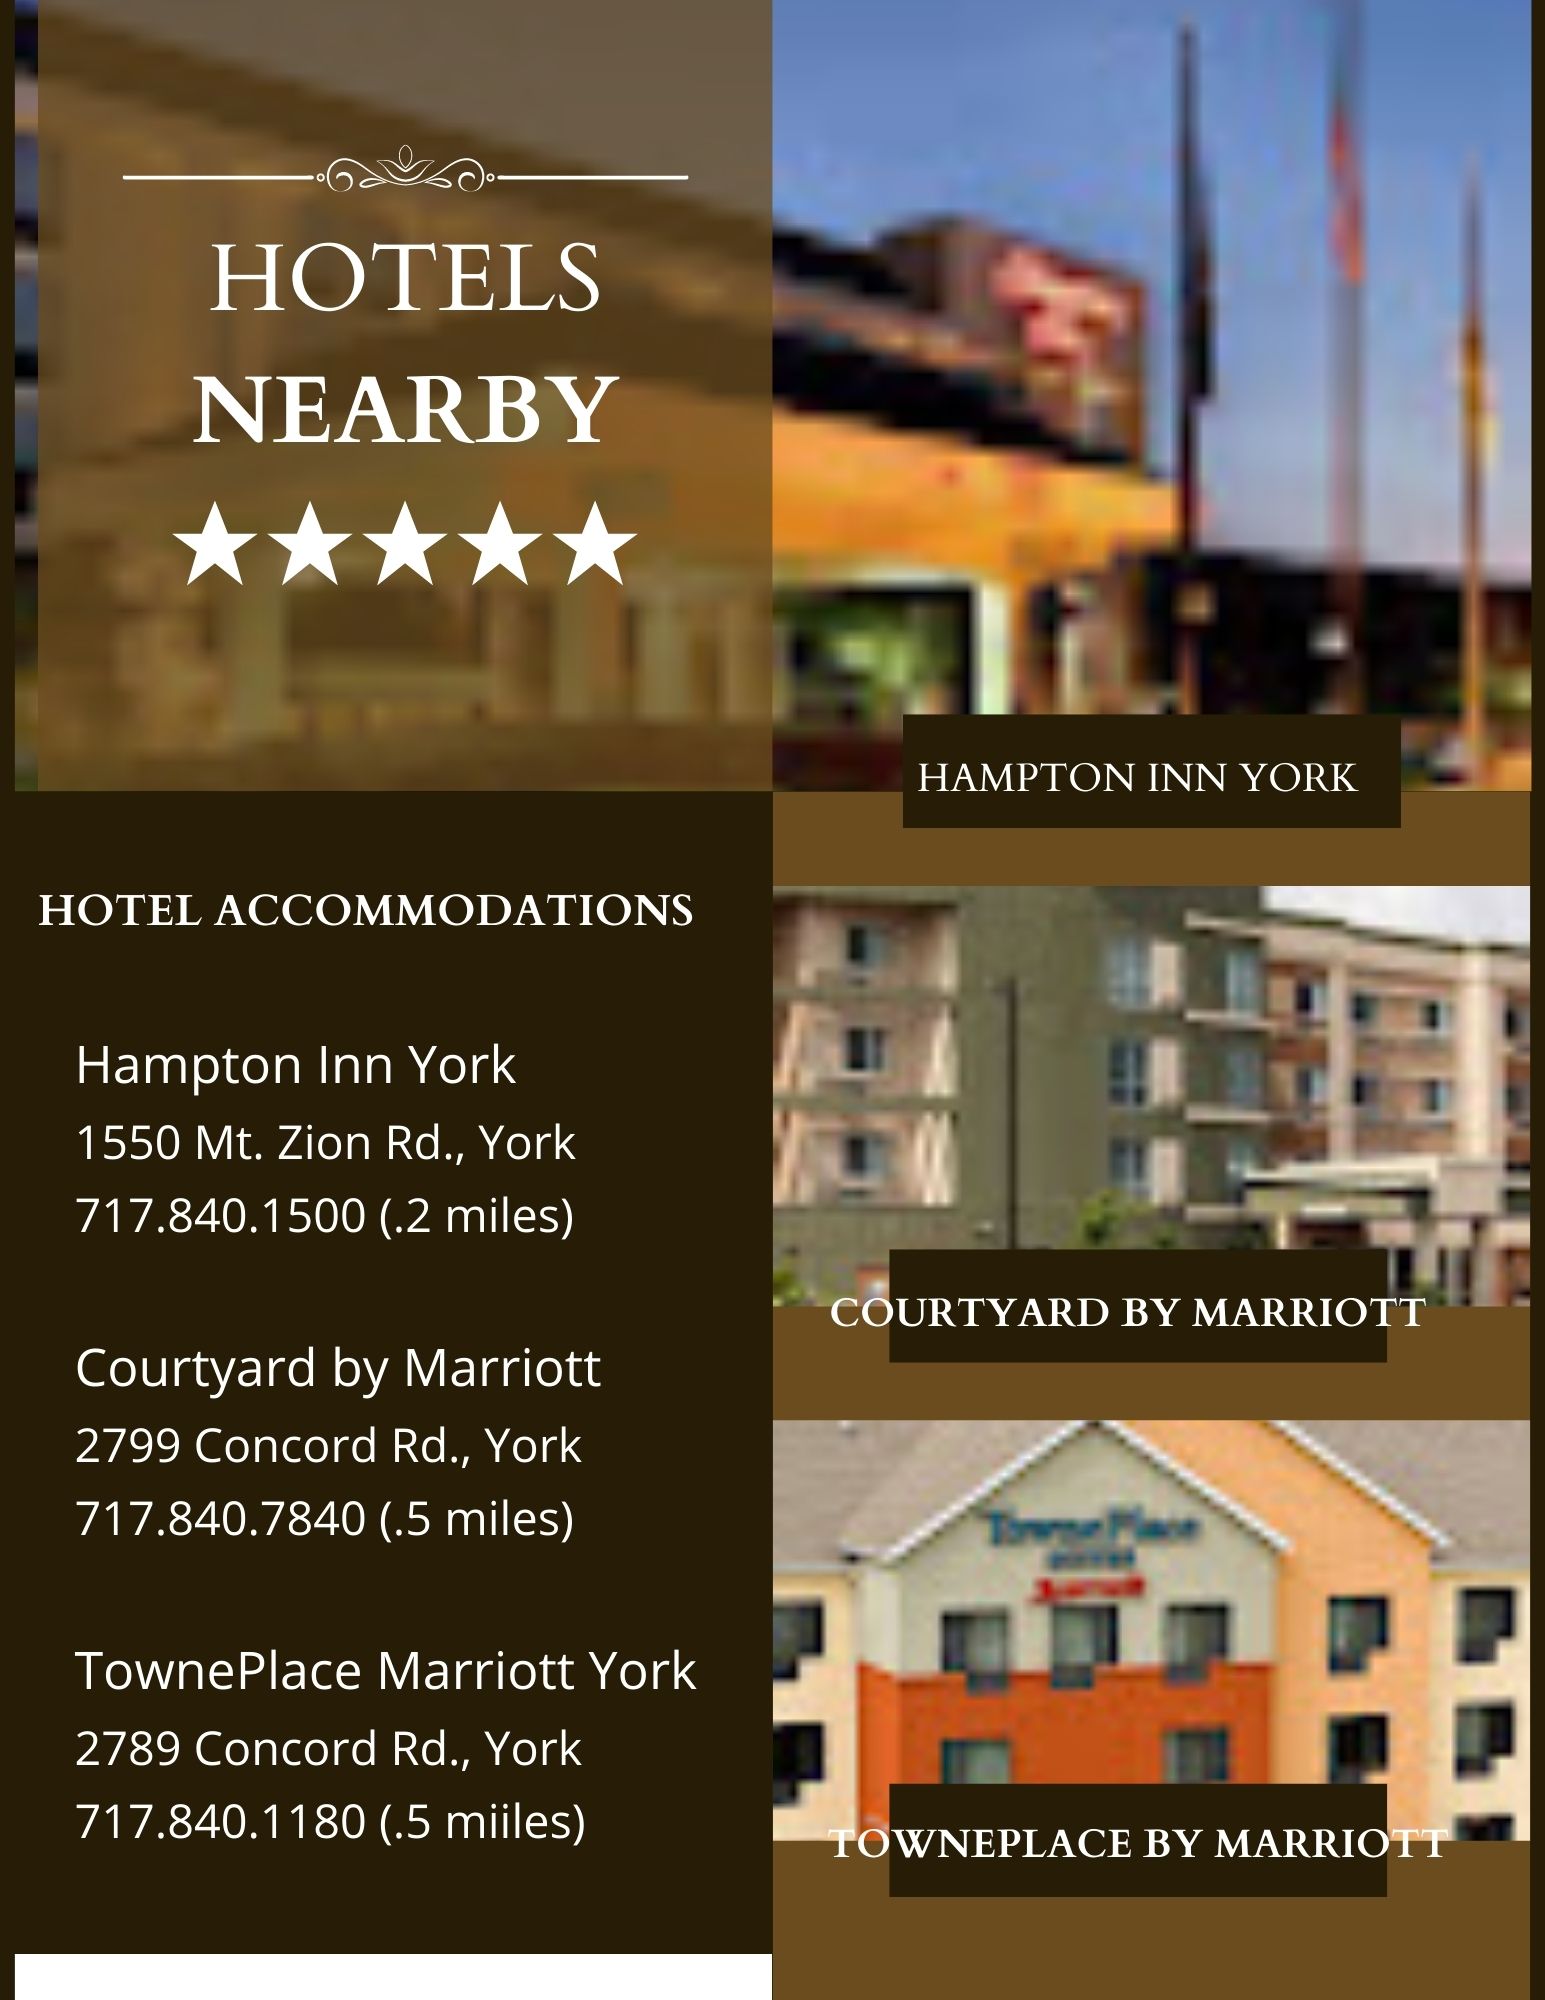 HOTELS NEARBY YORK